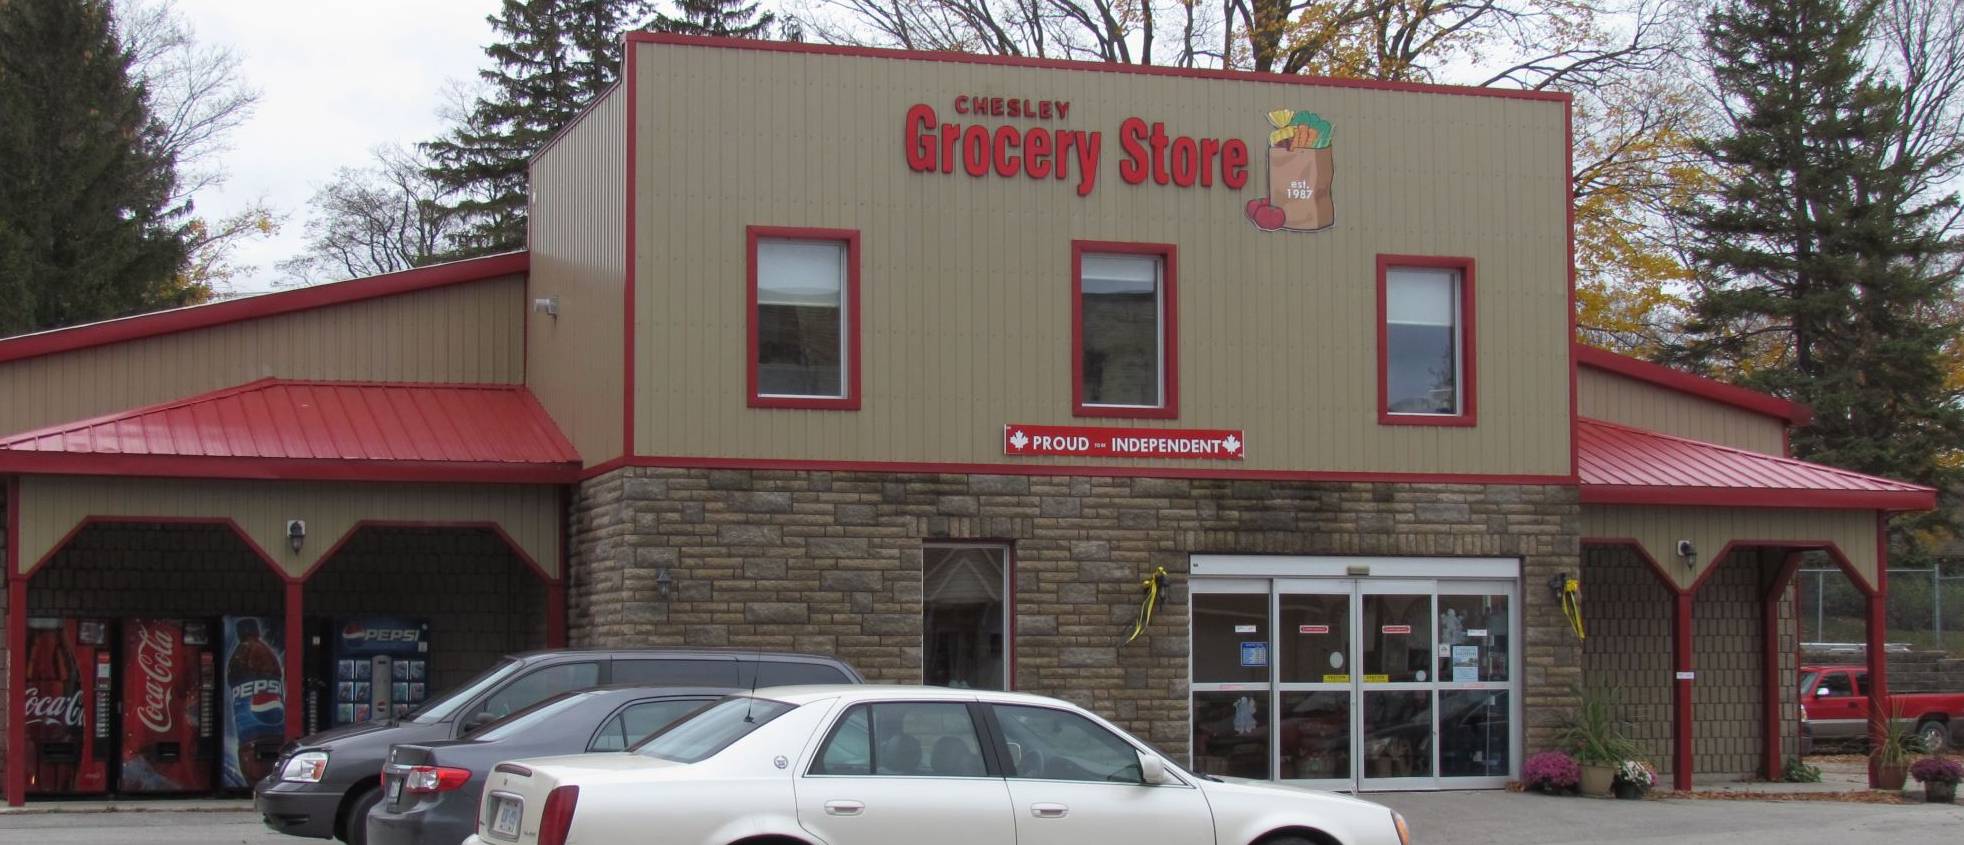 Chesley Grocery Store - Fruit & Vegetable